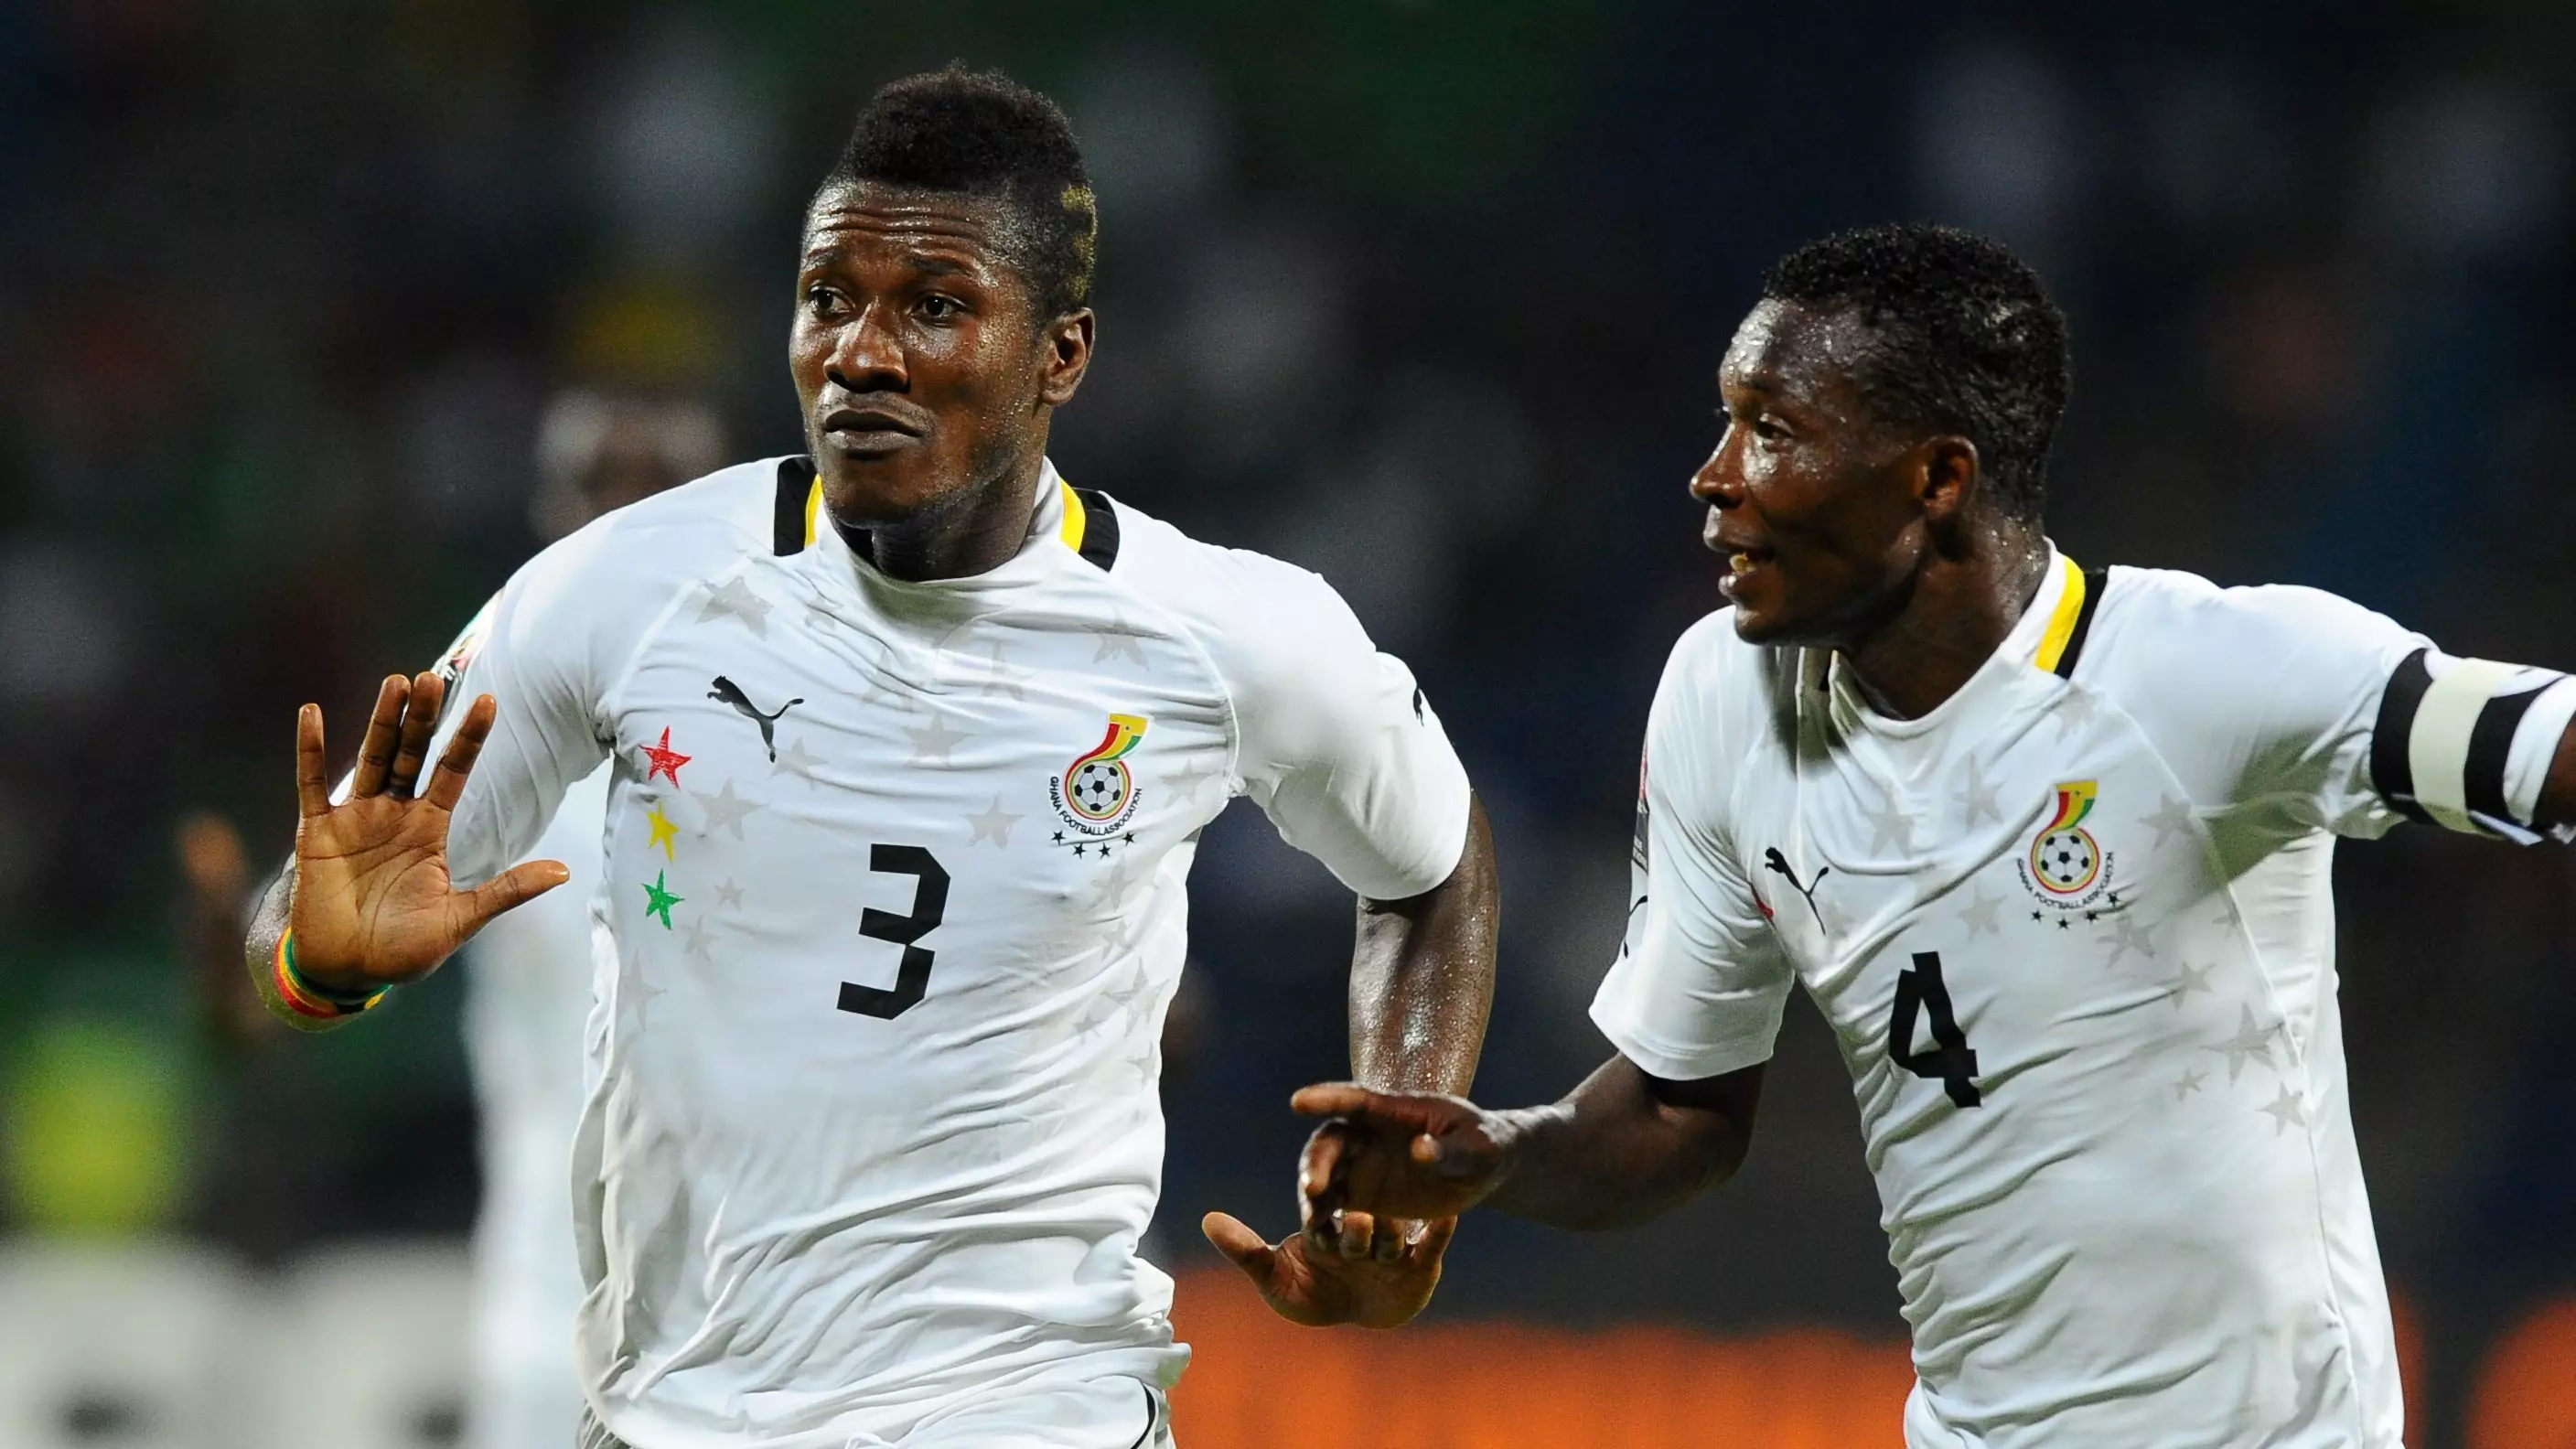 Asamoah Gyan Is The Latest Player To Get An Embarrassingly Bad Statue 